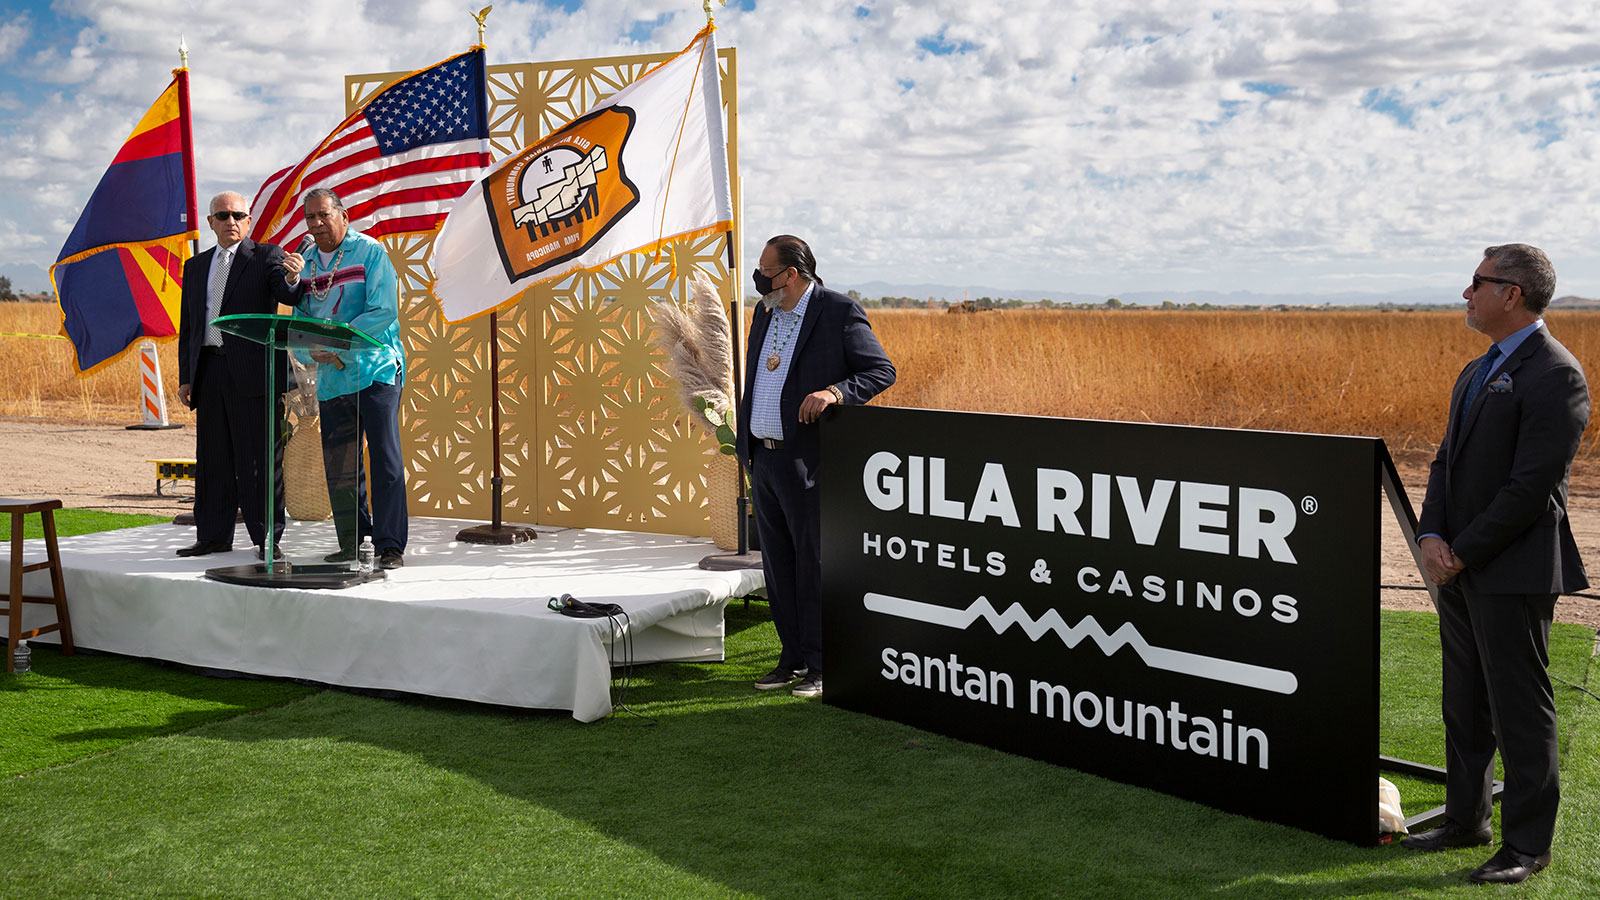 Gila River Hotels & Casinos held a groundbreaking ceremony for its fourth metro Phoenix venue, Sant...